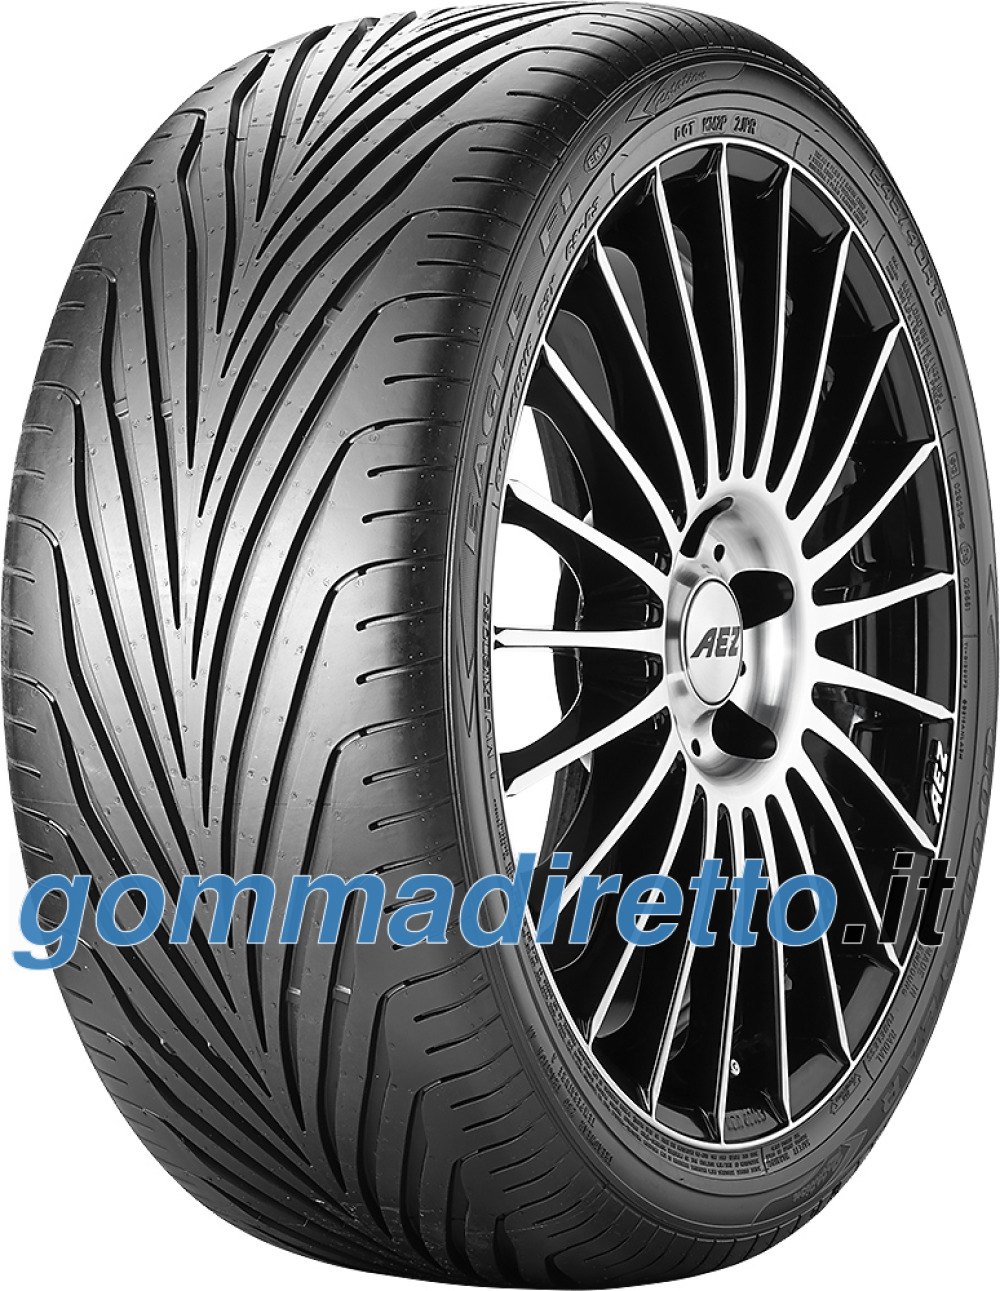 Image of Goodyear Eagle F1 GS-D3 ( 195/45 R15 78V )